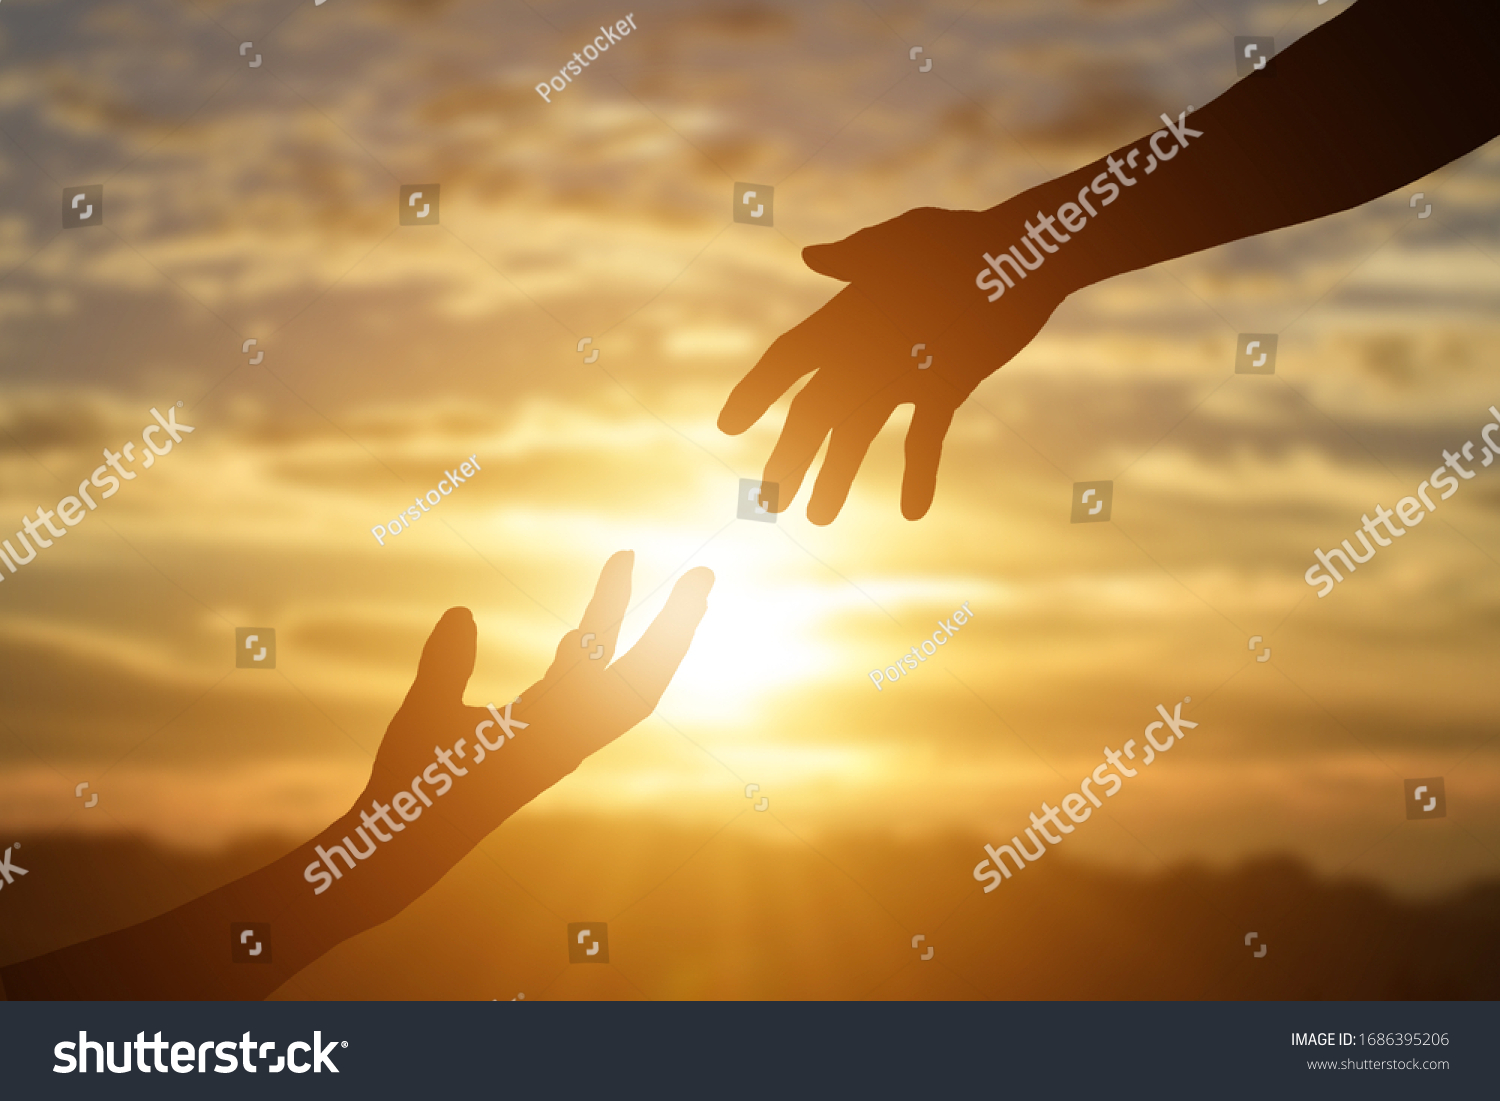 Silhouette of reaching, giving a helping hand, hope and support each other over sunset background.  #1686395206